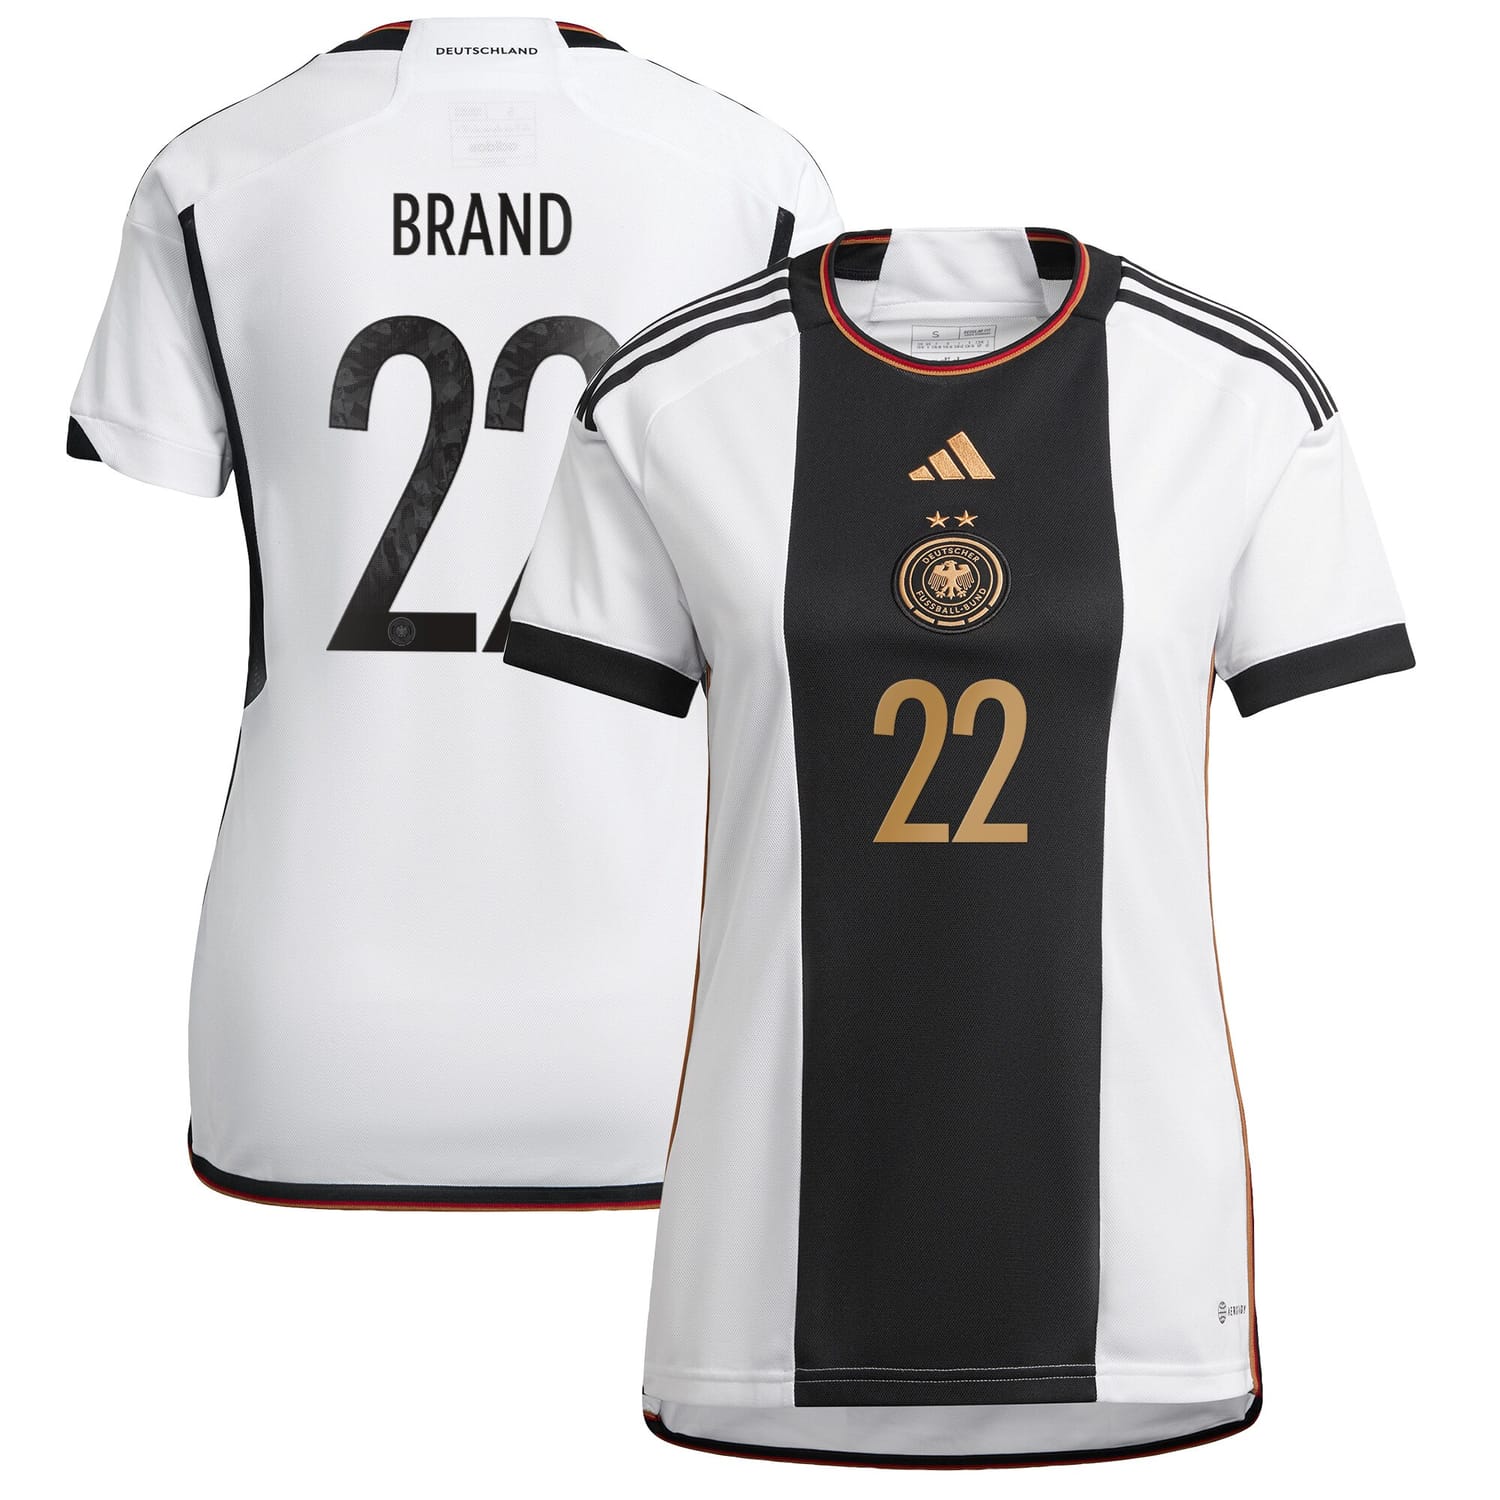 Germany National Team Home Jersey Shirt player Jule Brand 22 printing for Women